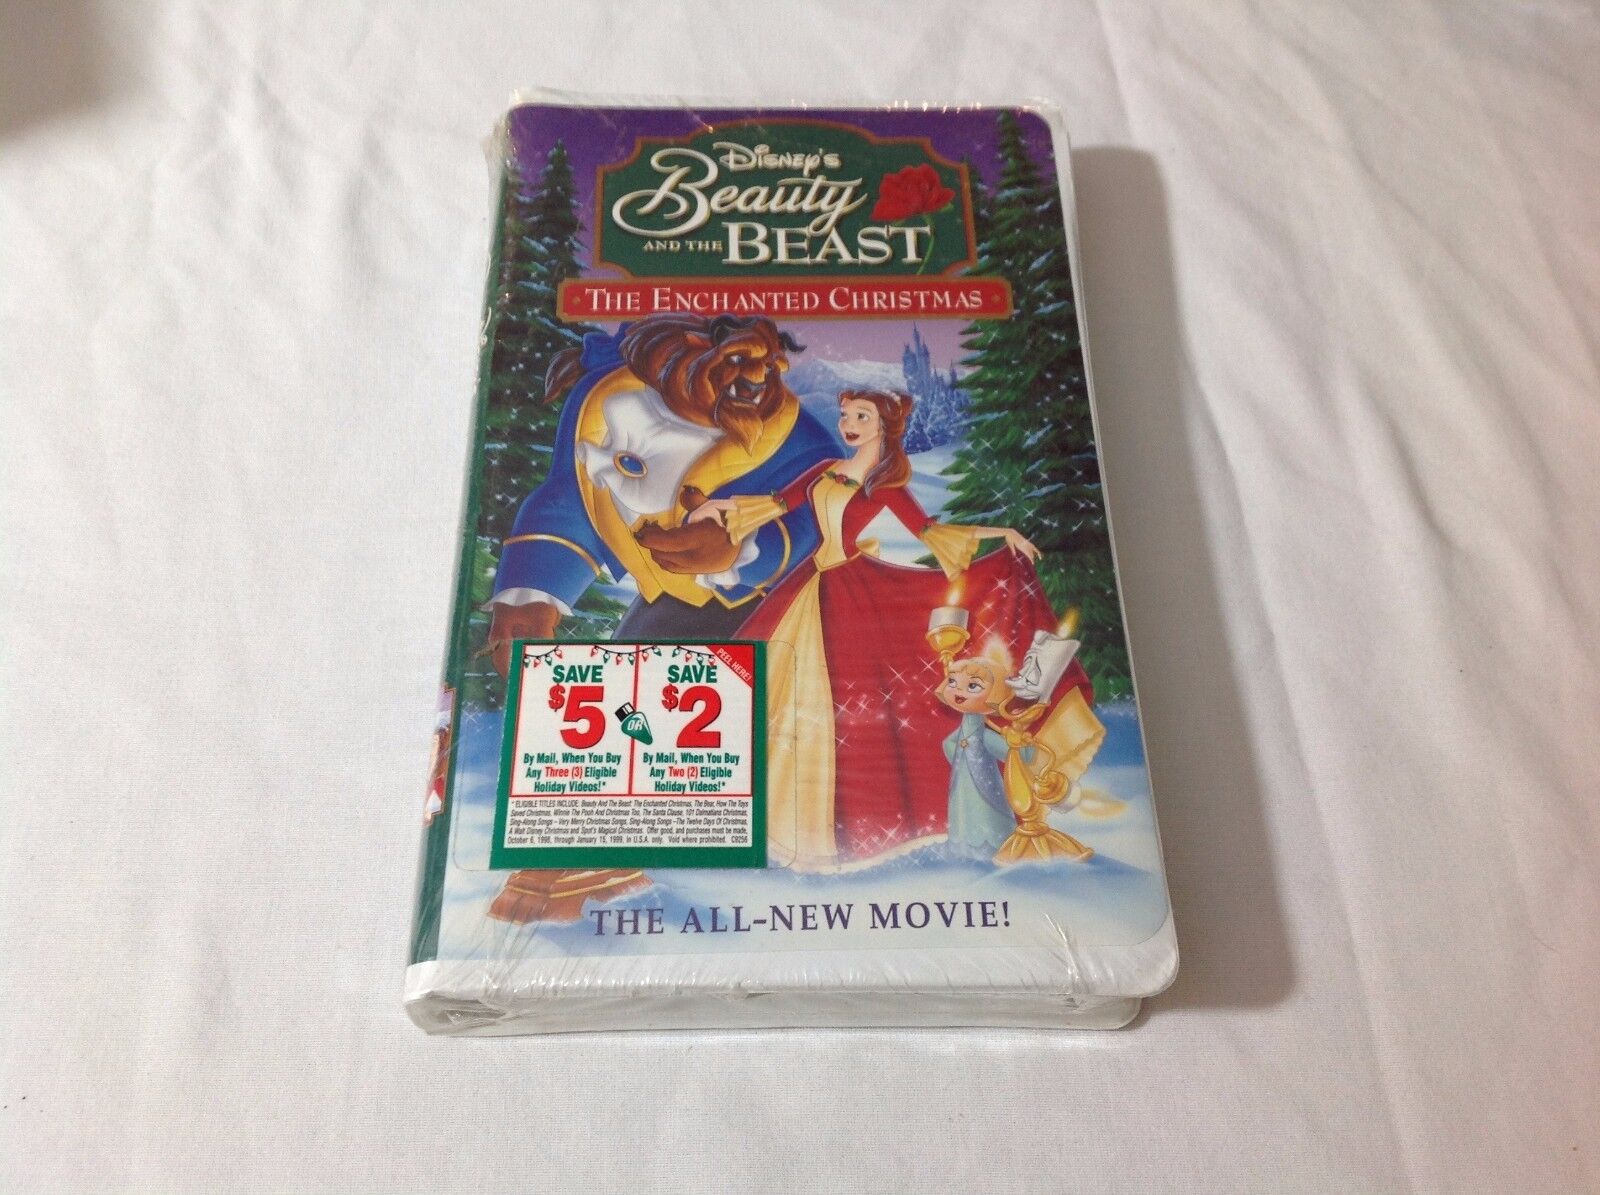 Vintage Walt Disney Beauty And The Beast: The Enchanted Christmas VHS Tape